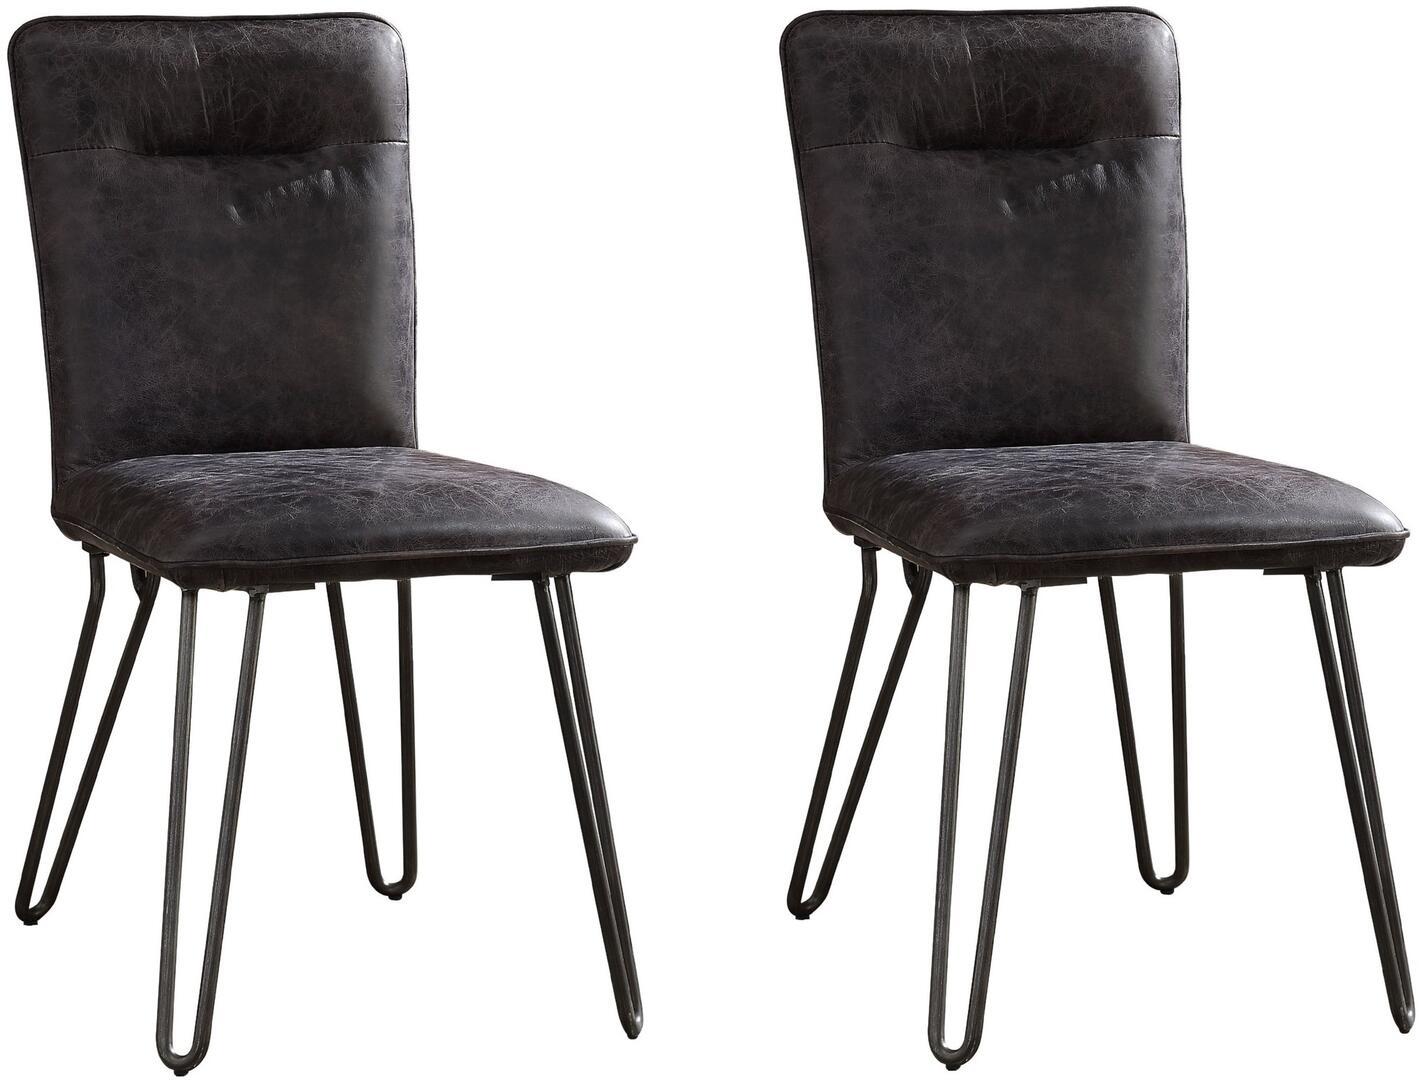 Modern Side Chair Set Orchards 70424-2pcs in Black Top grain leather